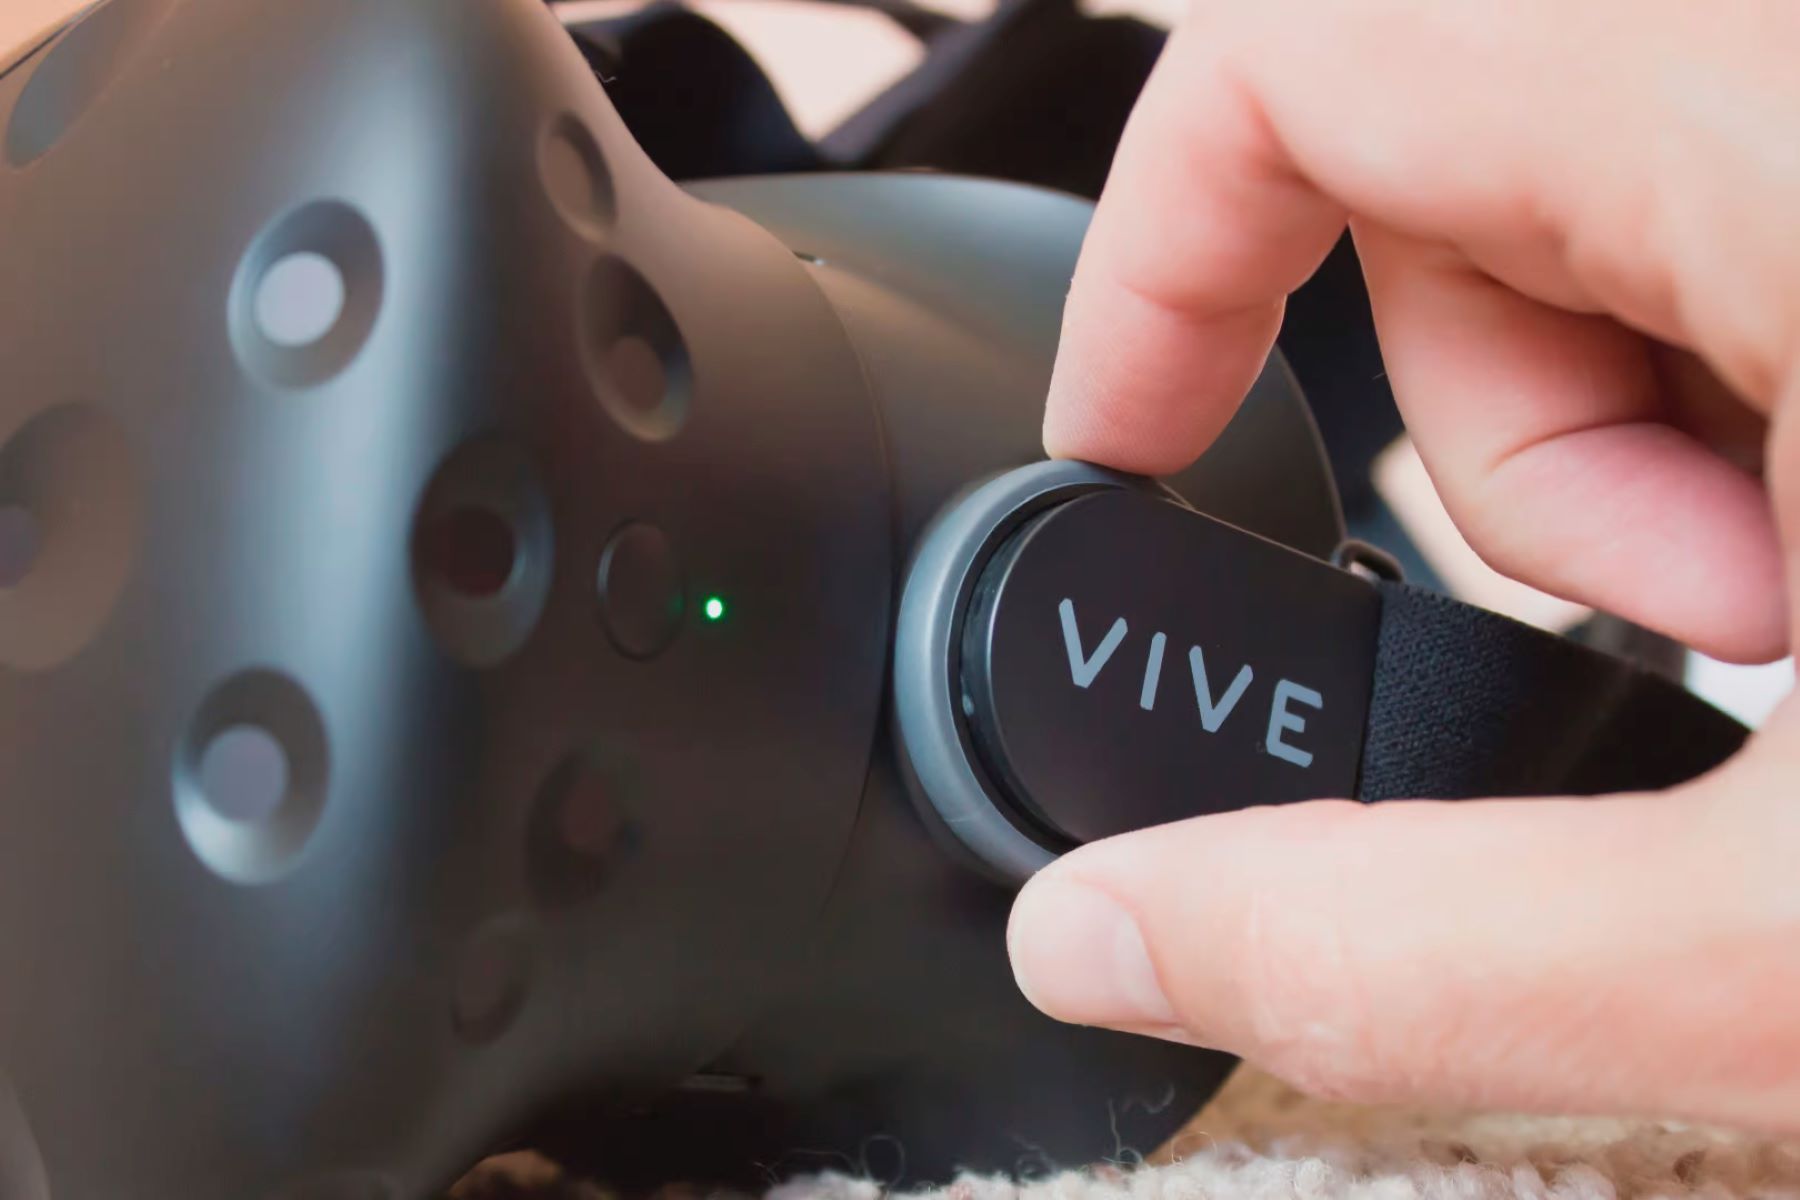 How To Update The Firmware On HTC Vive Lighthouse